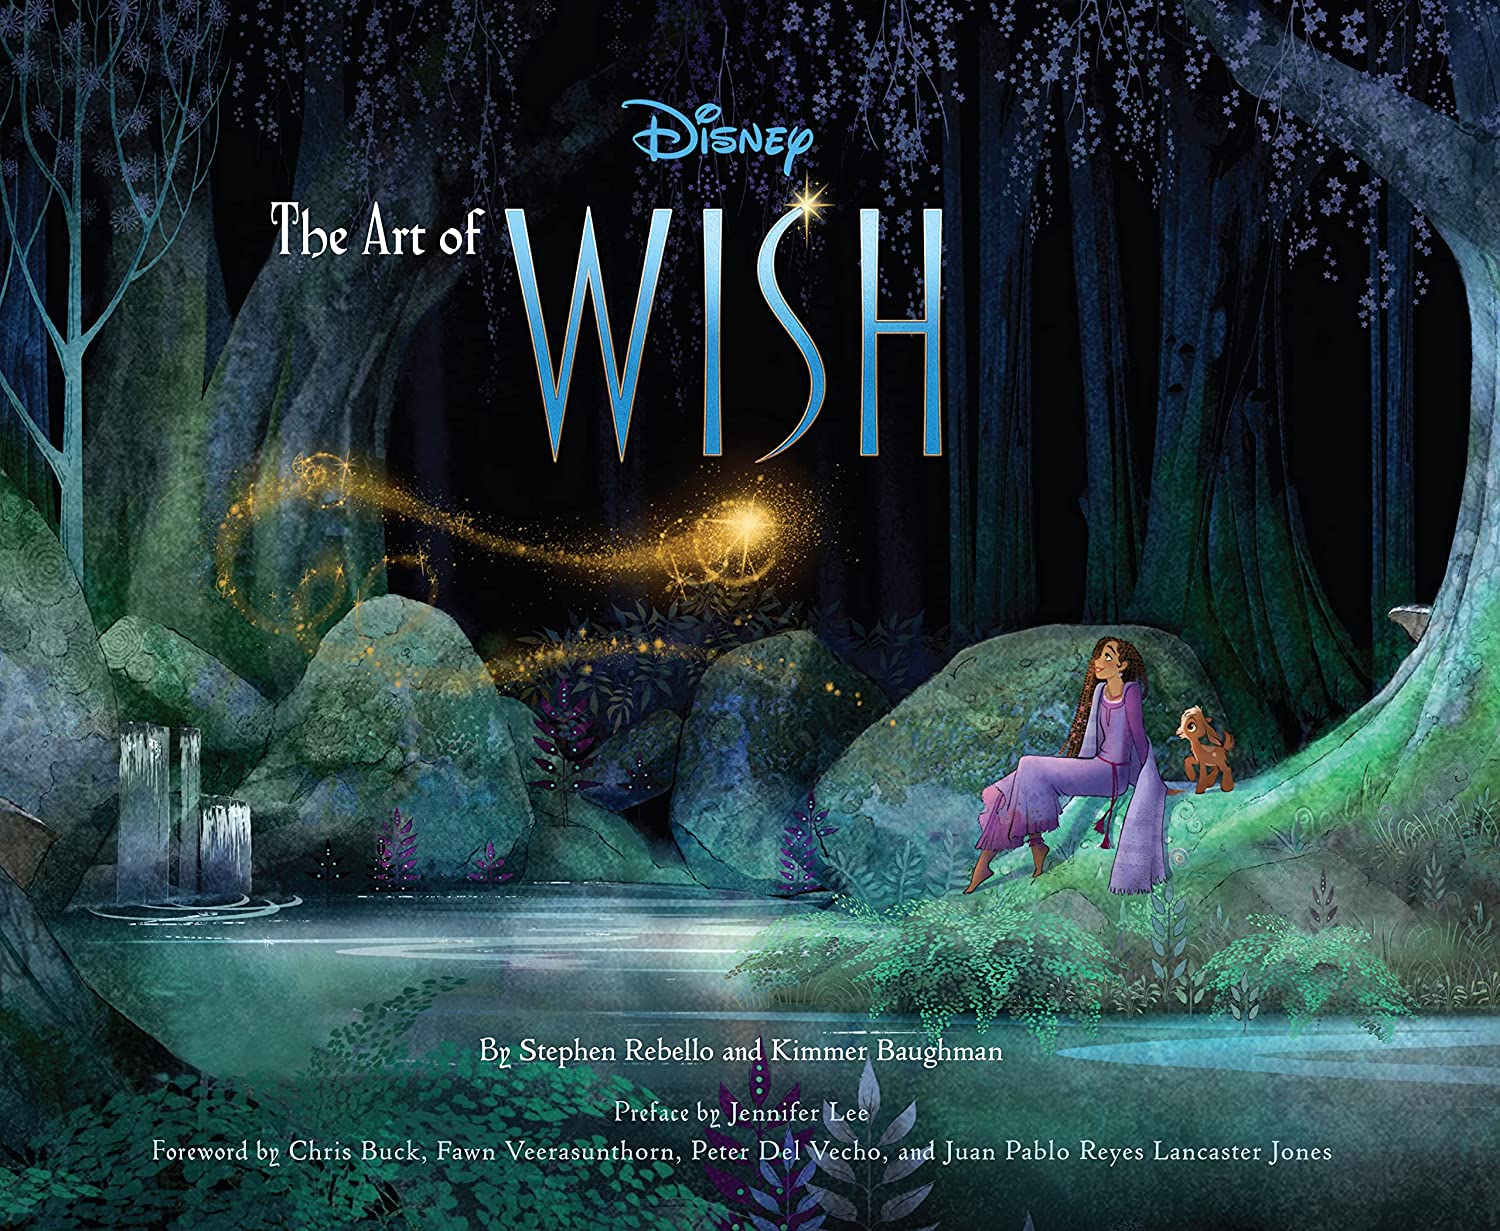 https://static.wikia.nocookie.net/disney/images/9/91/The_Art_of_Wish.jpg/revision/latest?cb=20230601162530